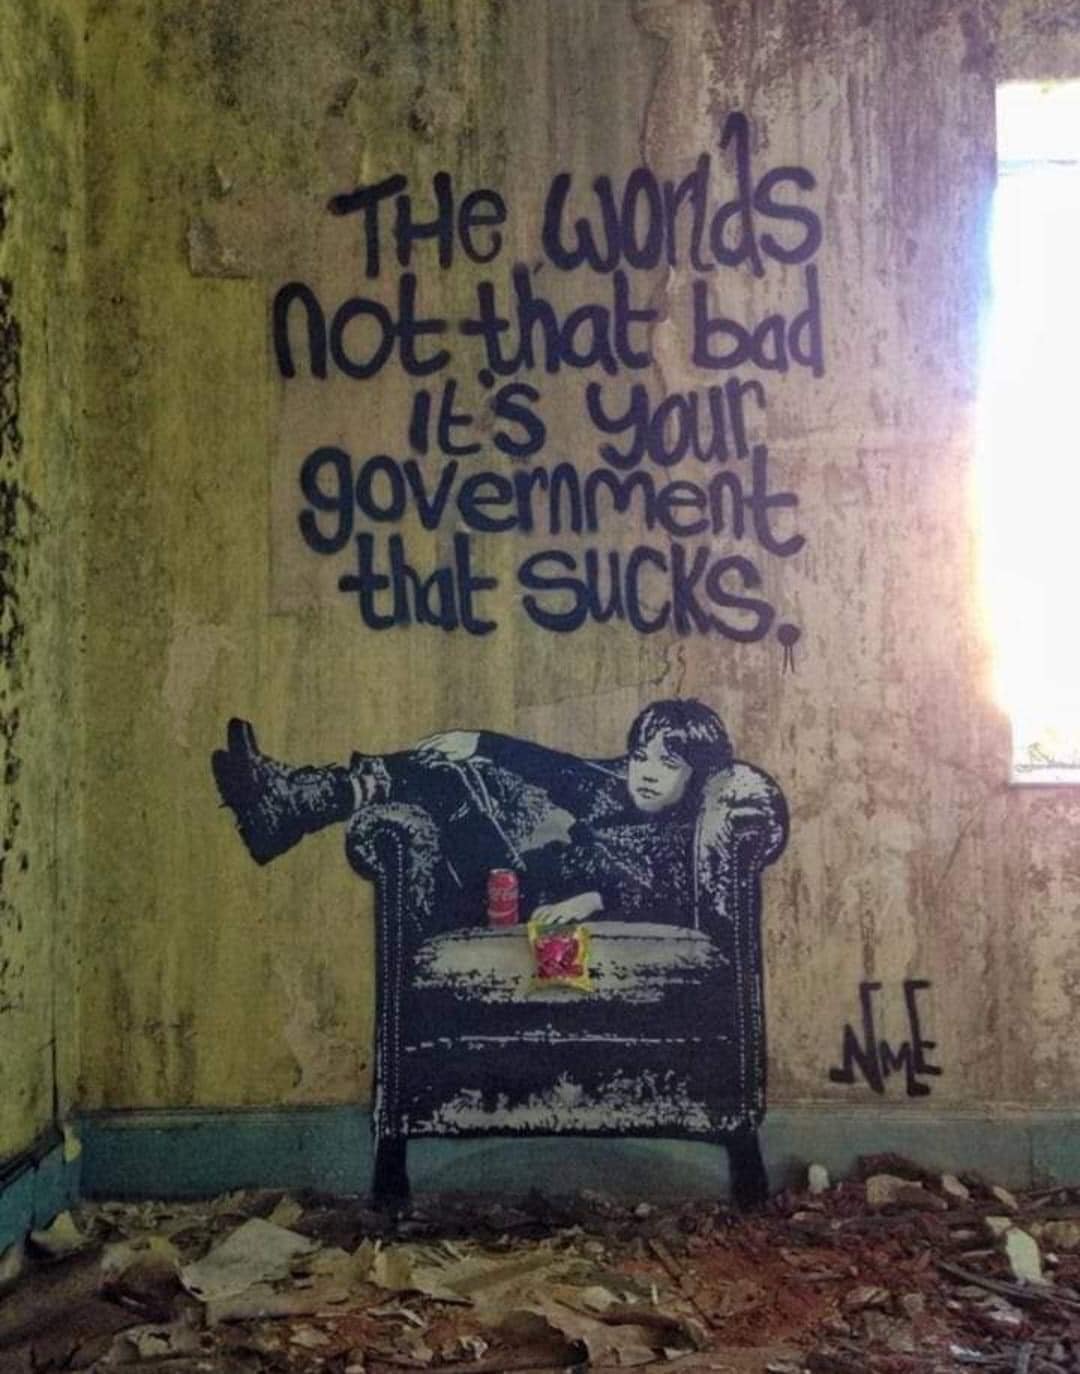 the world is not that bad, it's your government that sucks